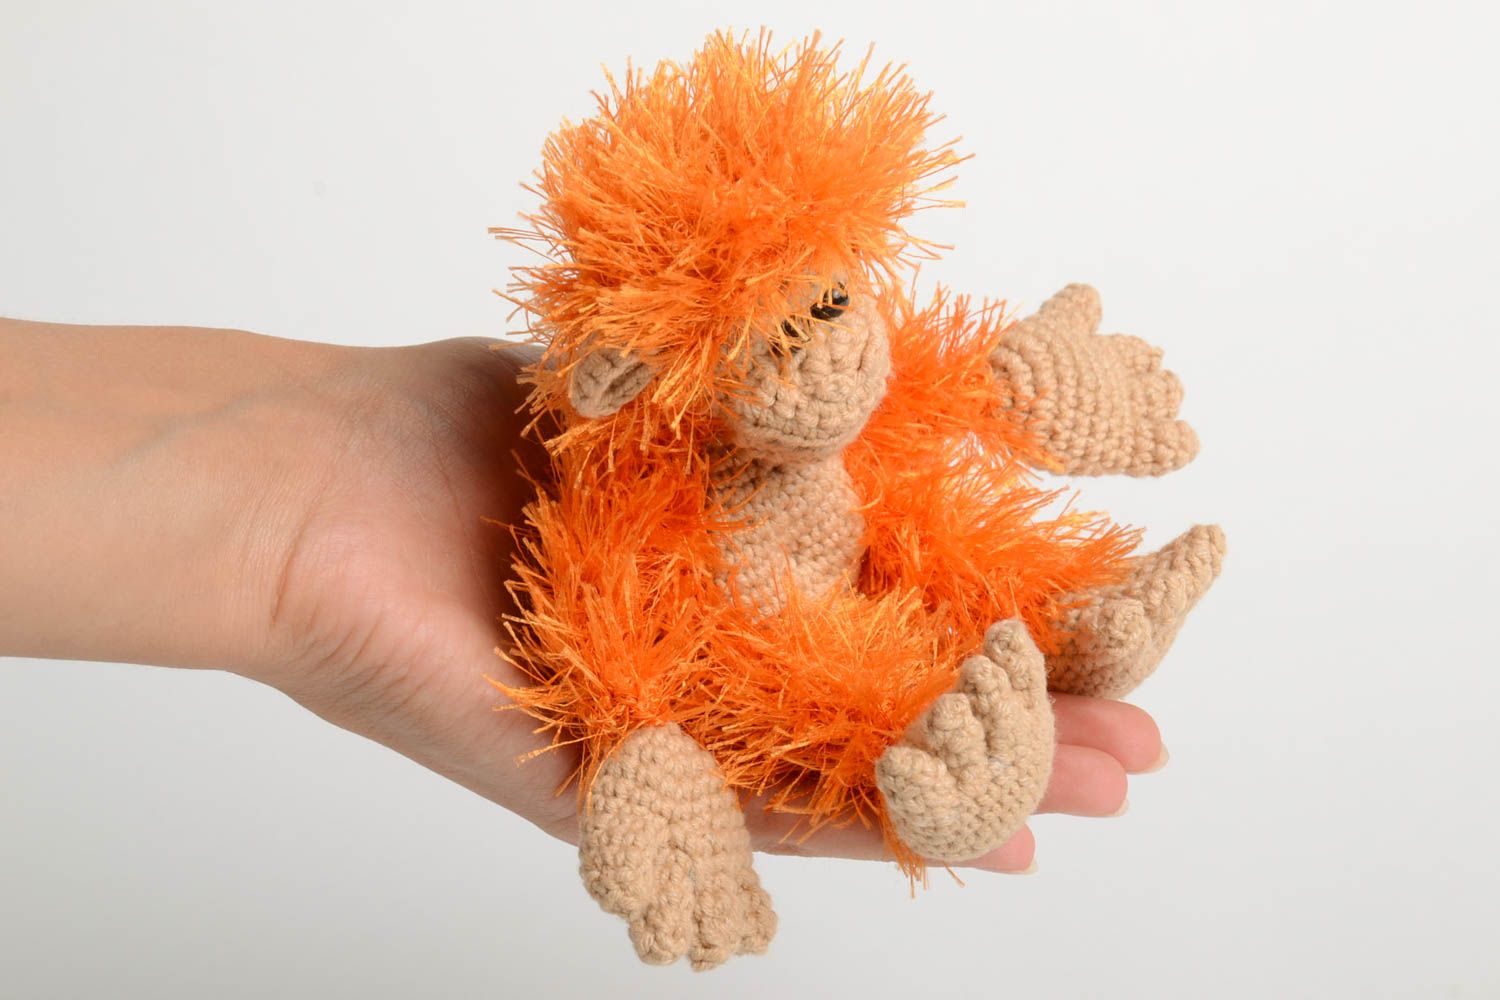 Cute crocheted toy monkey soft toy unusual handmade toy for kids cute toy photo 5